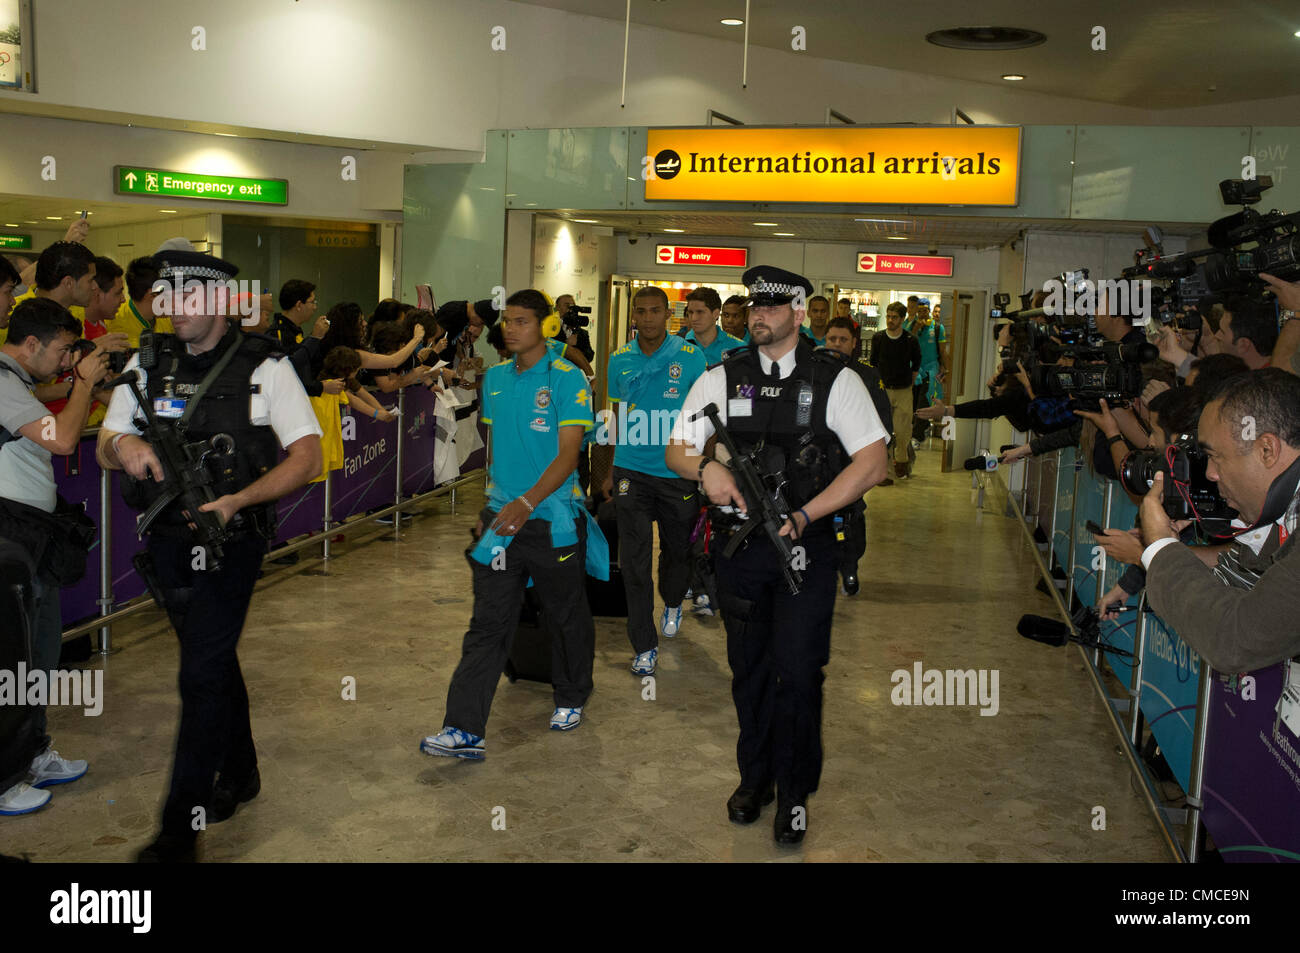 17th July 2012.  London Heathrow, UK.  Olympic Competitors and Officials arrive at Heathrow airport terminals. The Brazil Olympic Football team emerge from the airport terminal building with Police security . Stock Photo